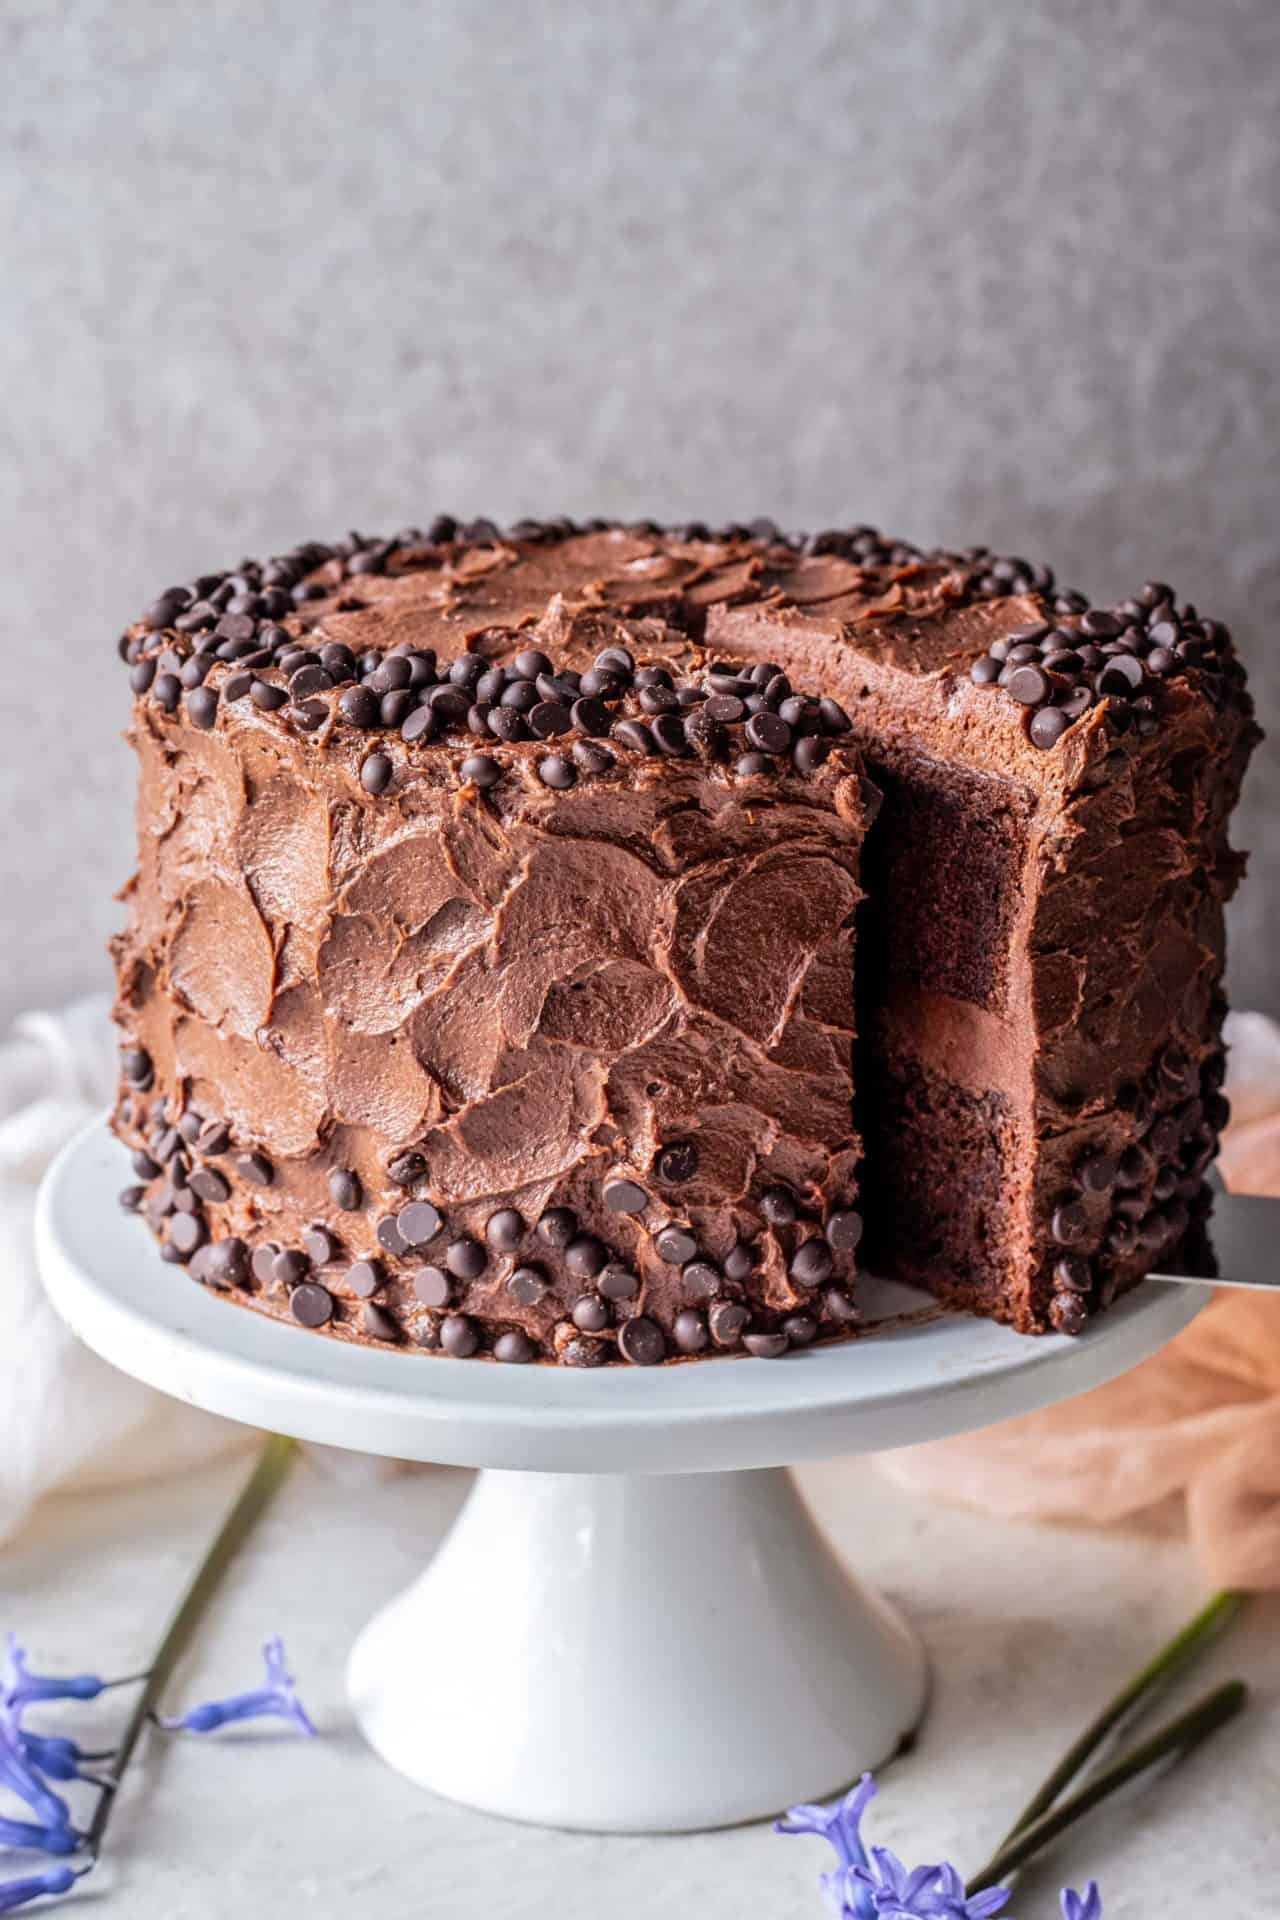 This is the ultimate gluten-free chocolate cake. It is rich, chocolaty, flavorful, perfectly sweetened and just a dream come true for all the chocoholics out there.
